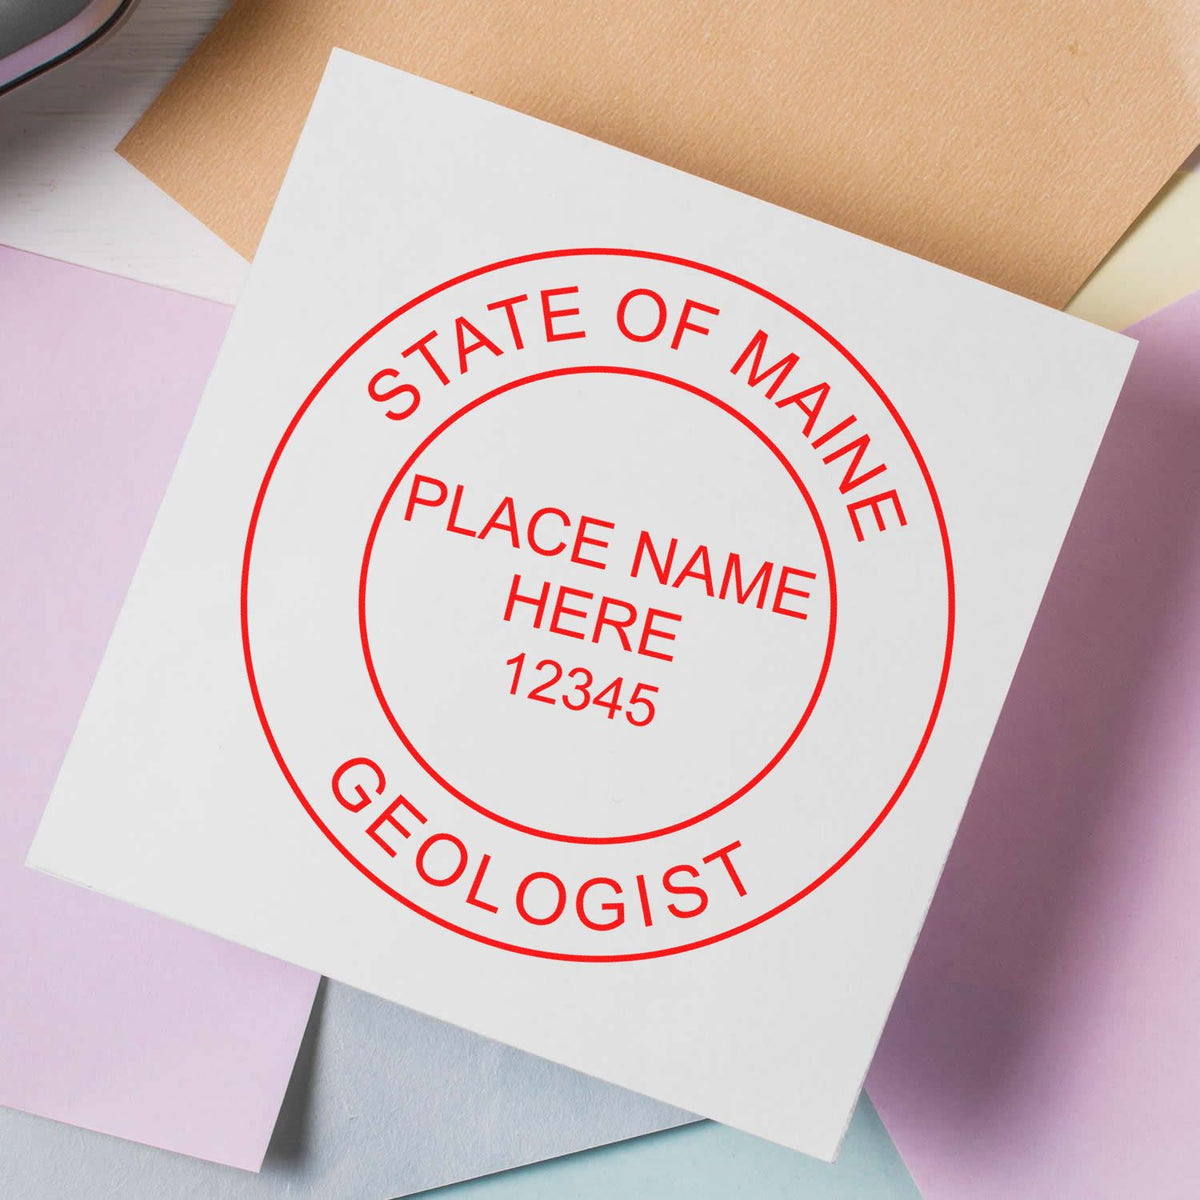 The Premium MaxLight Pre-Inked Maine Geology Stamp stamp impression comes to life with a crisp, detailed image stamped on paper - showcasing true professional quality.